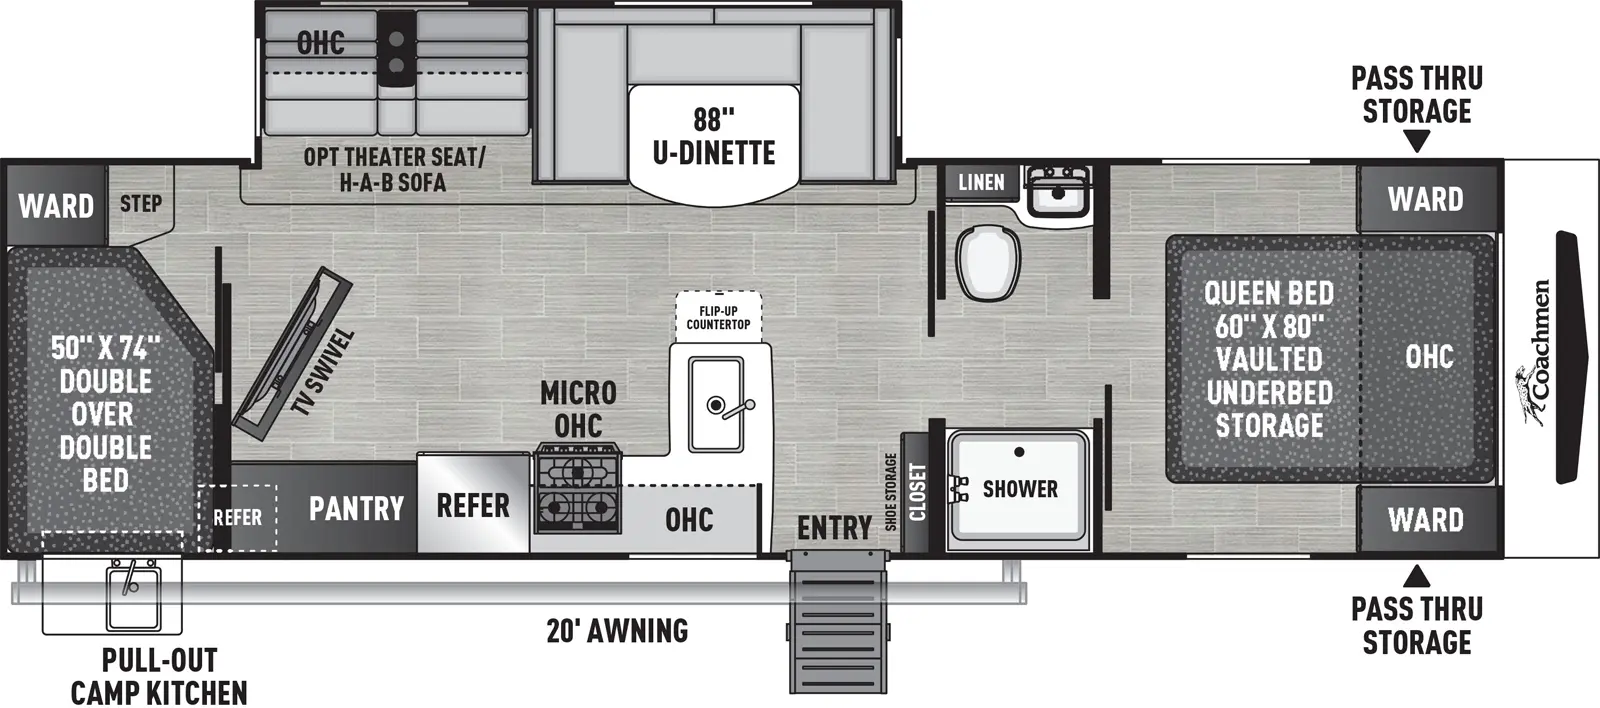 The 294BHDS has one slideout and one entry. Exterior features front pass-thru storage, 20 foot awning, and pull-out camp kitchen with sink and refrigerator. Interior layout front to back: foot-facing queen bed with vaulted underbed storage, overhead cabinet, and wardrobes on each side; pass-thru full bathroom with linen closet; off-door side slideout with u-dinette, and hide-a-bed sofa with overhead cabinet (optional theater seat); door side closet and shoe storage, entry, peninsula kitchen counter with sink and flip up countertop wraps to door side with overhead cabinet, microwave, cooktop, microwave, and TV swivel with hidden pantry; rear double over double bed with wardrobe and step.